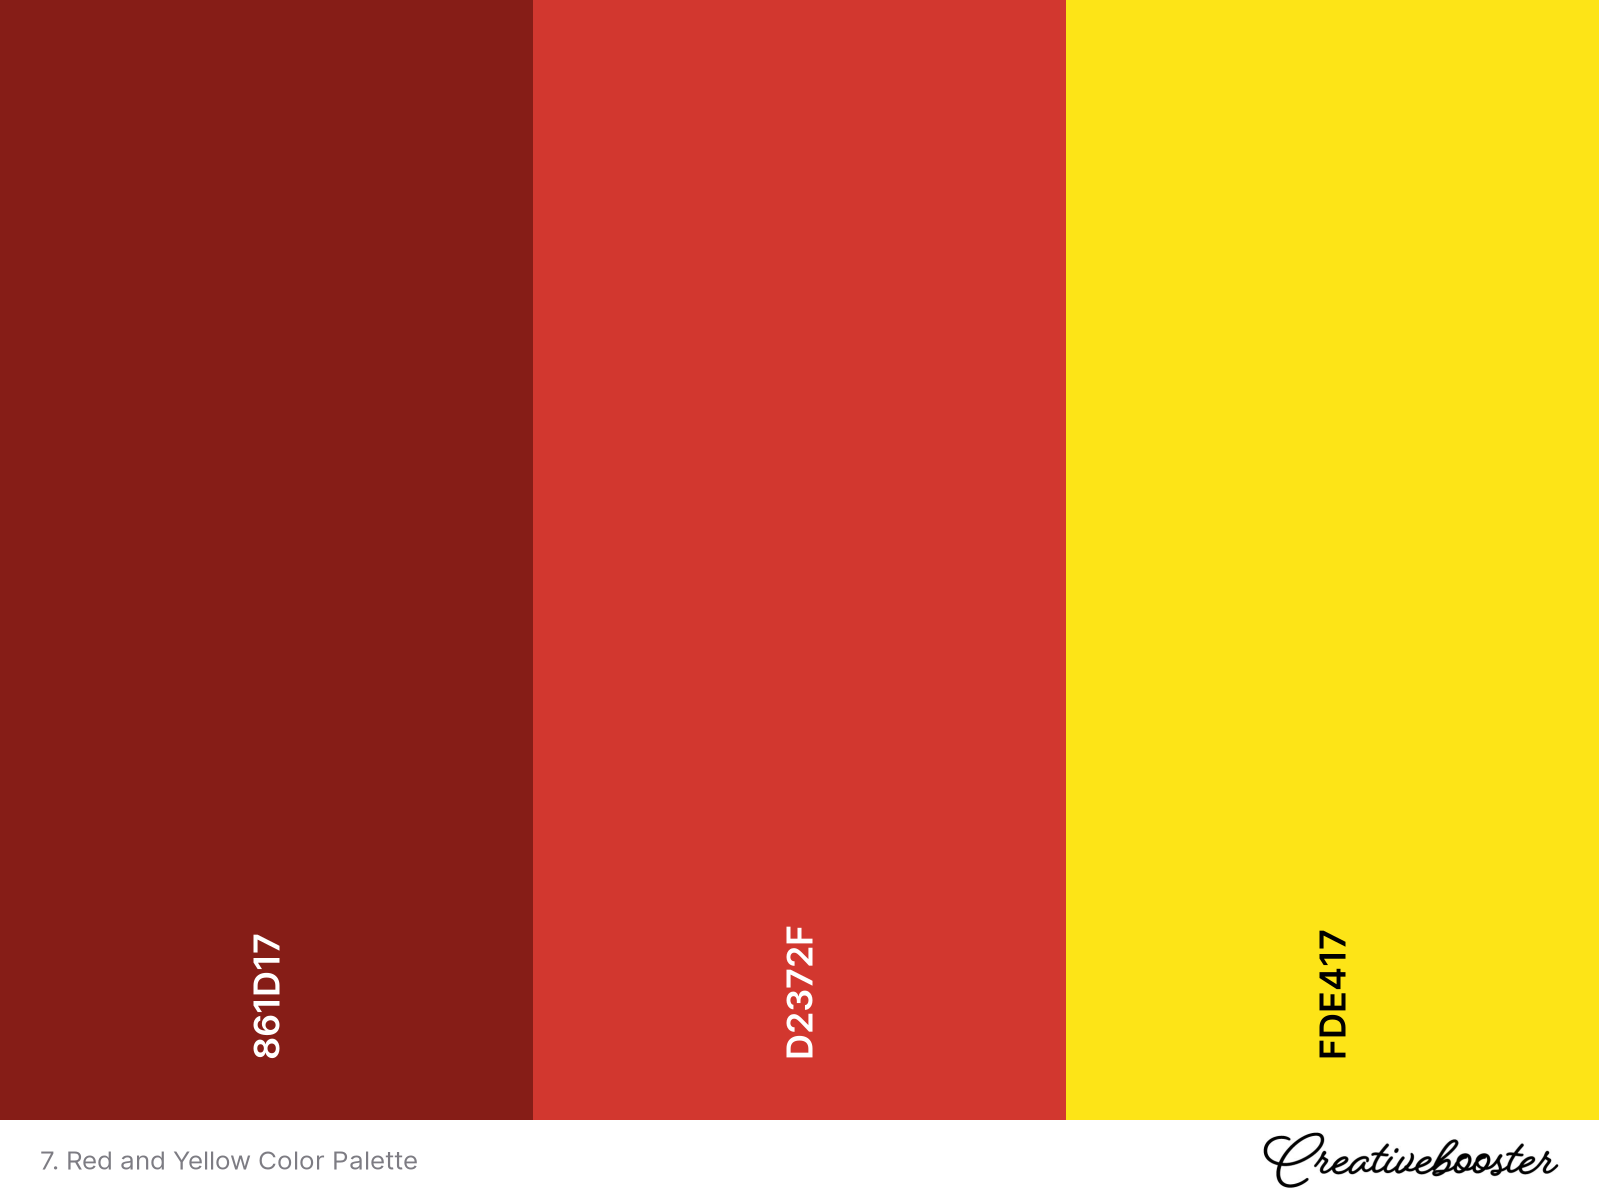 7. Red and Yellow Color Palette